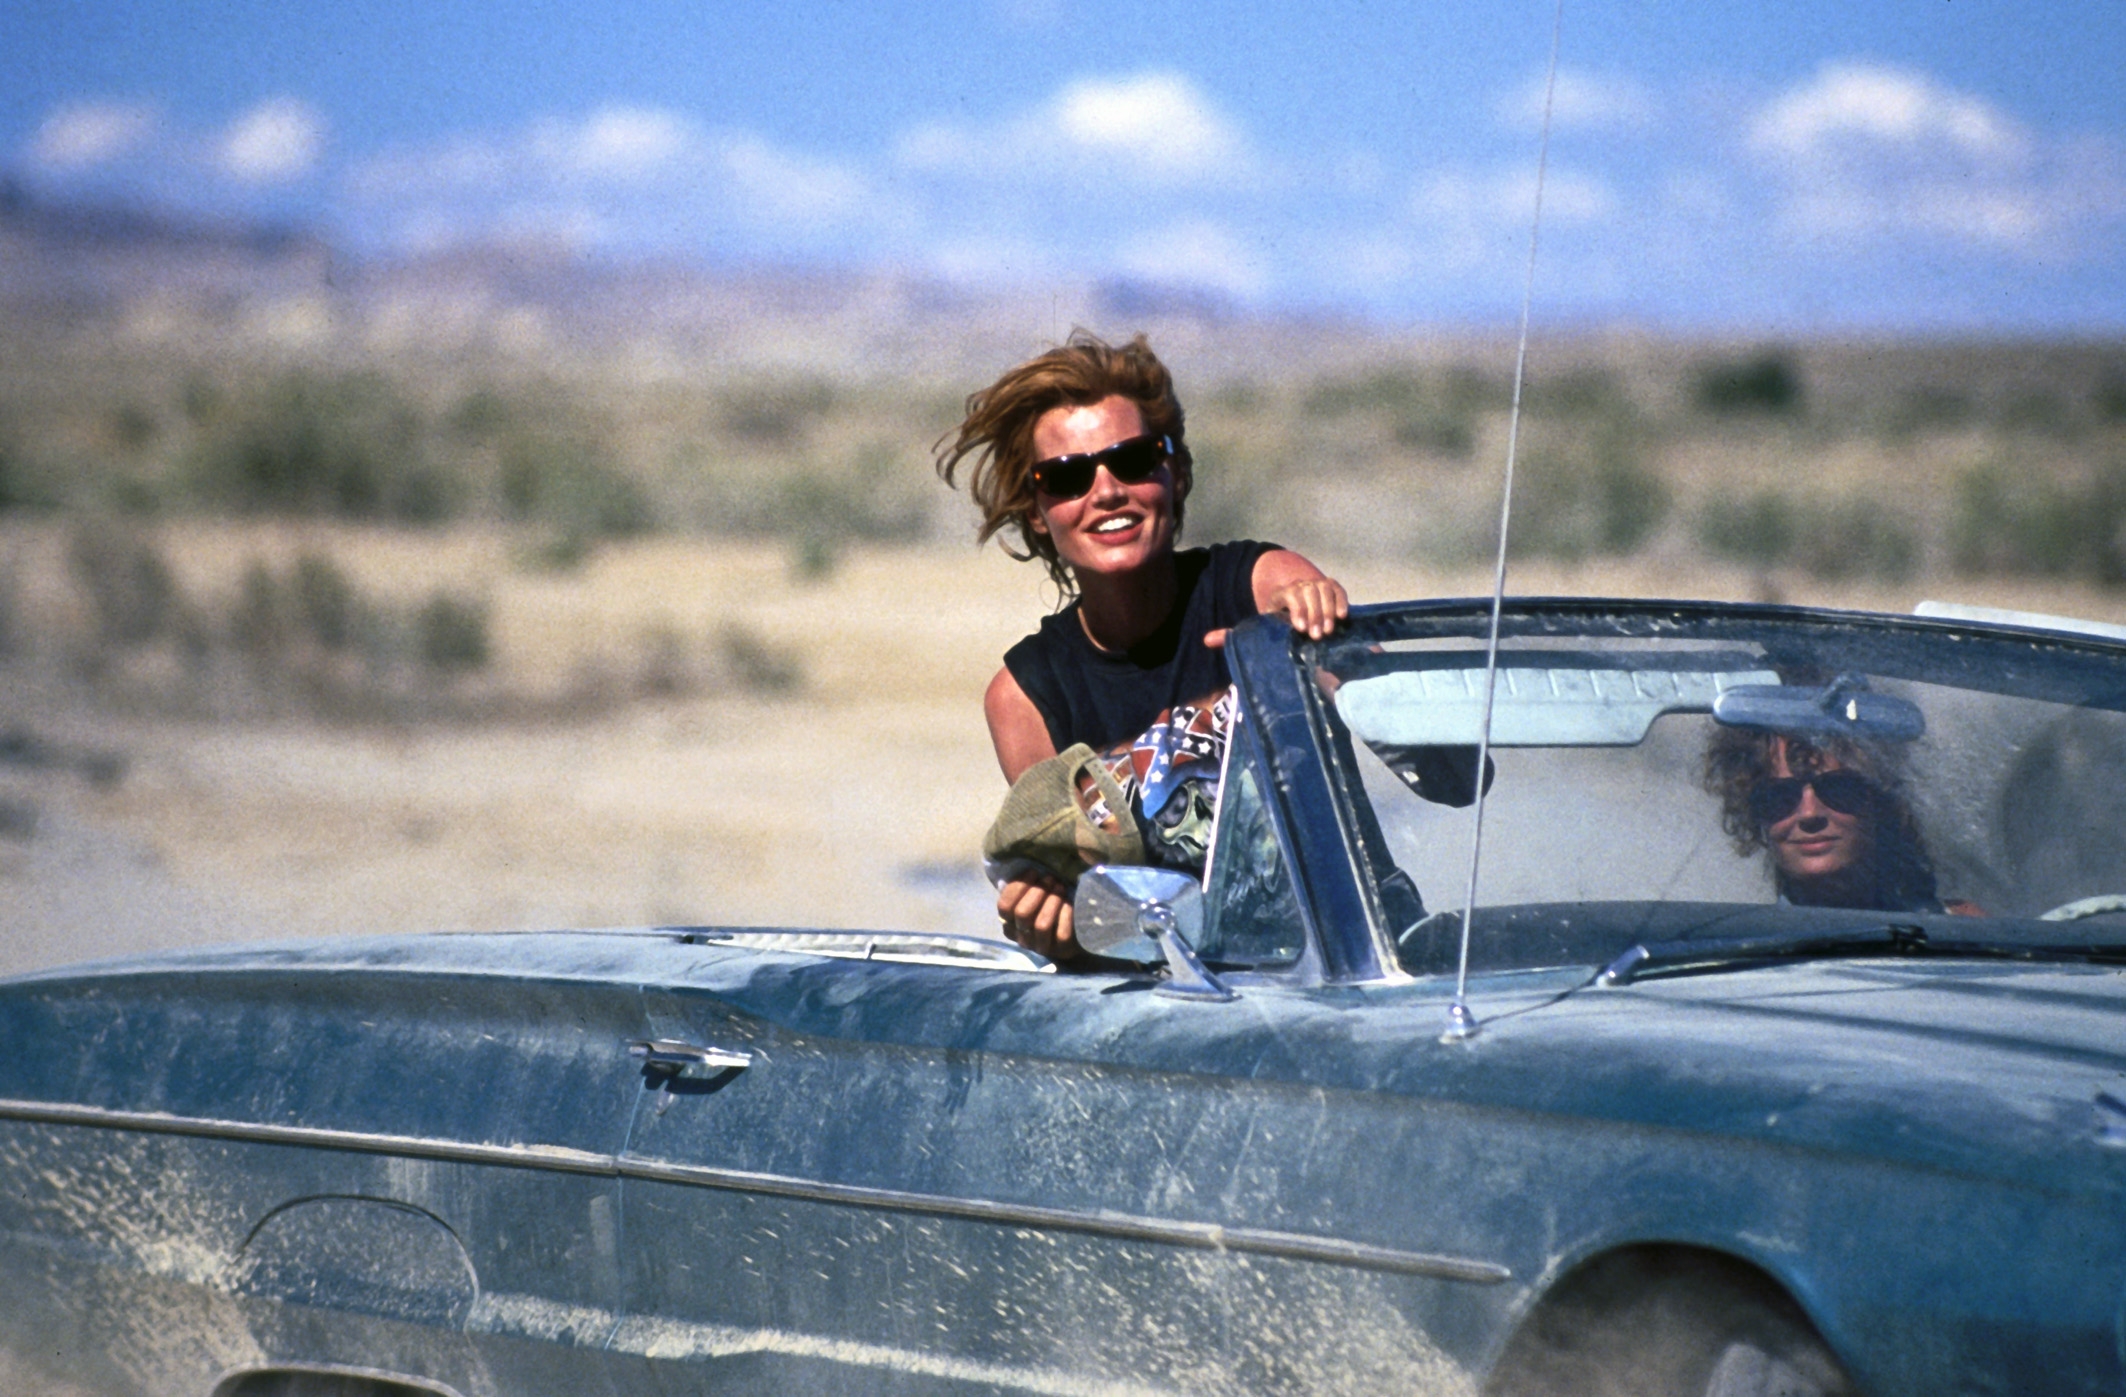 Image du film Thelma et Louise ba517aef-afe3-4d74-92aa-3082ddb519bc